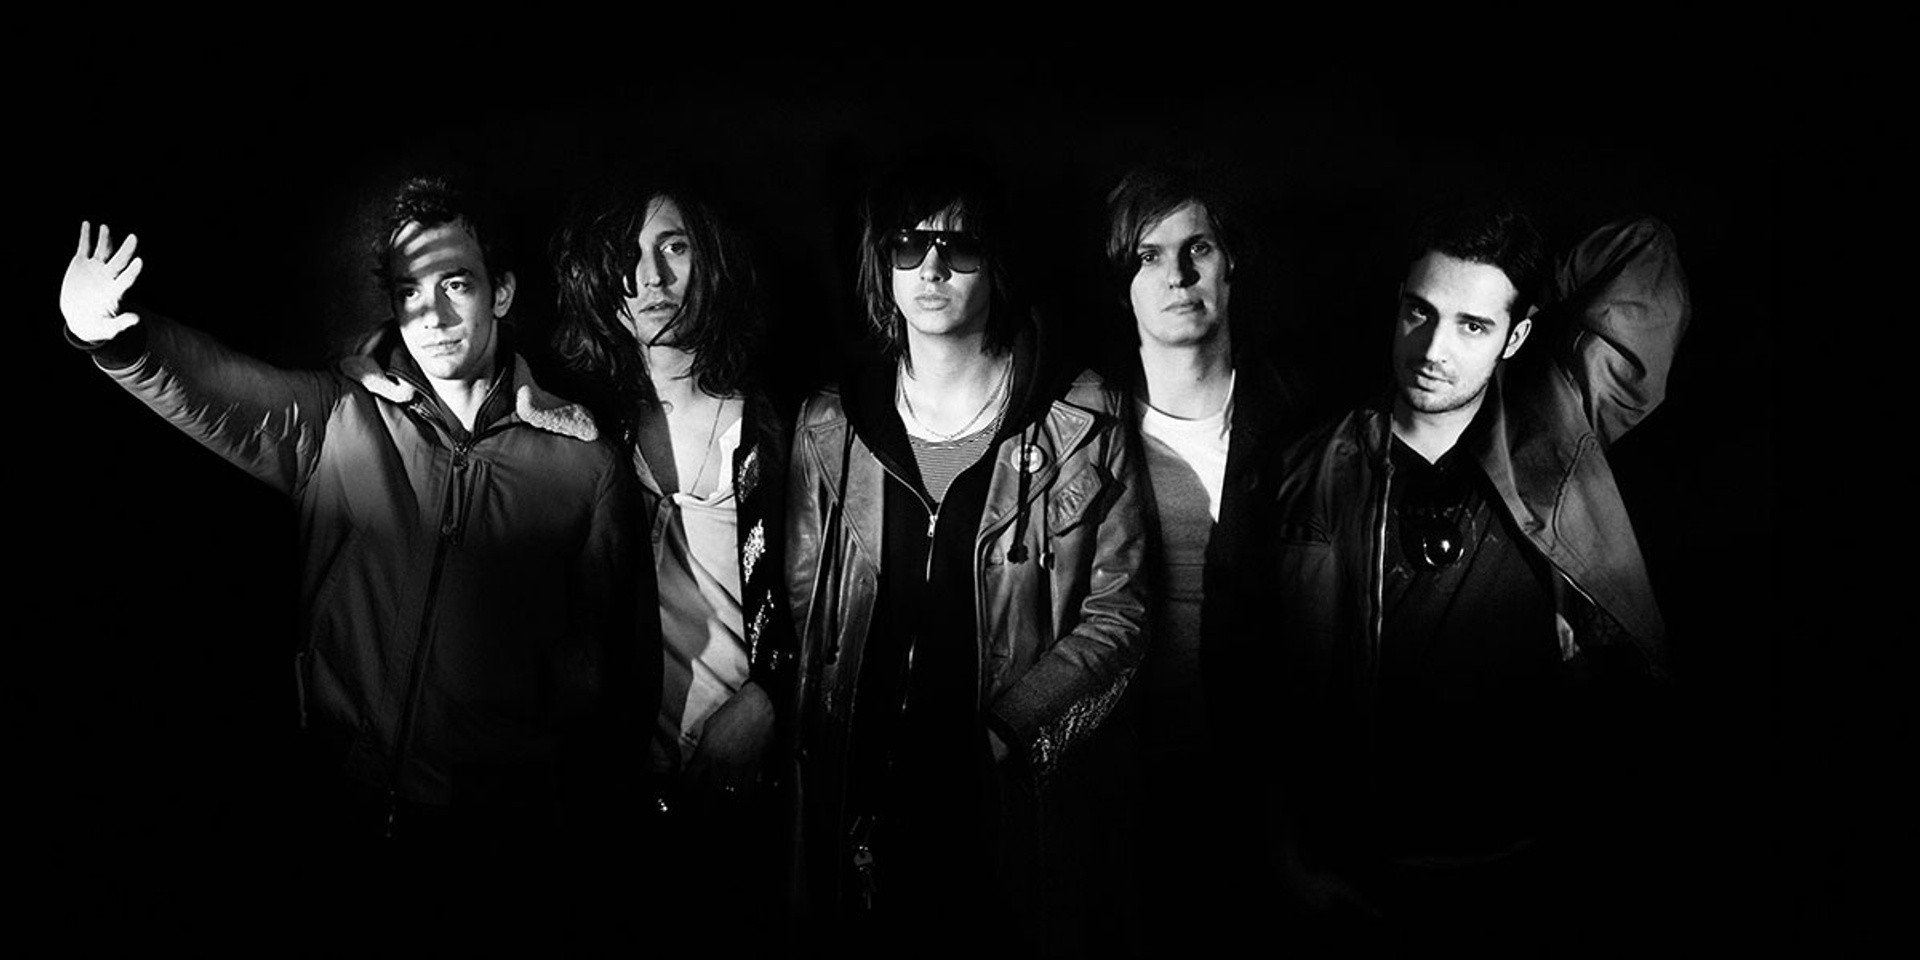 The Strokes drop music video for new single, 'At The Door, reveal tracklist for sixth studio album, The New Abnormal